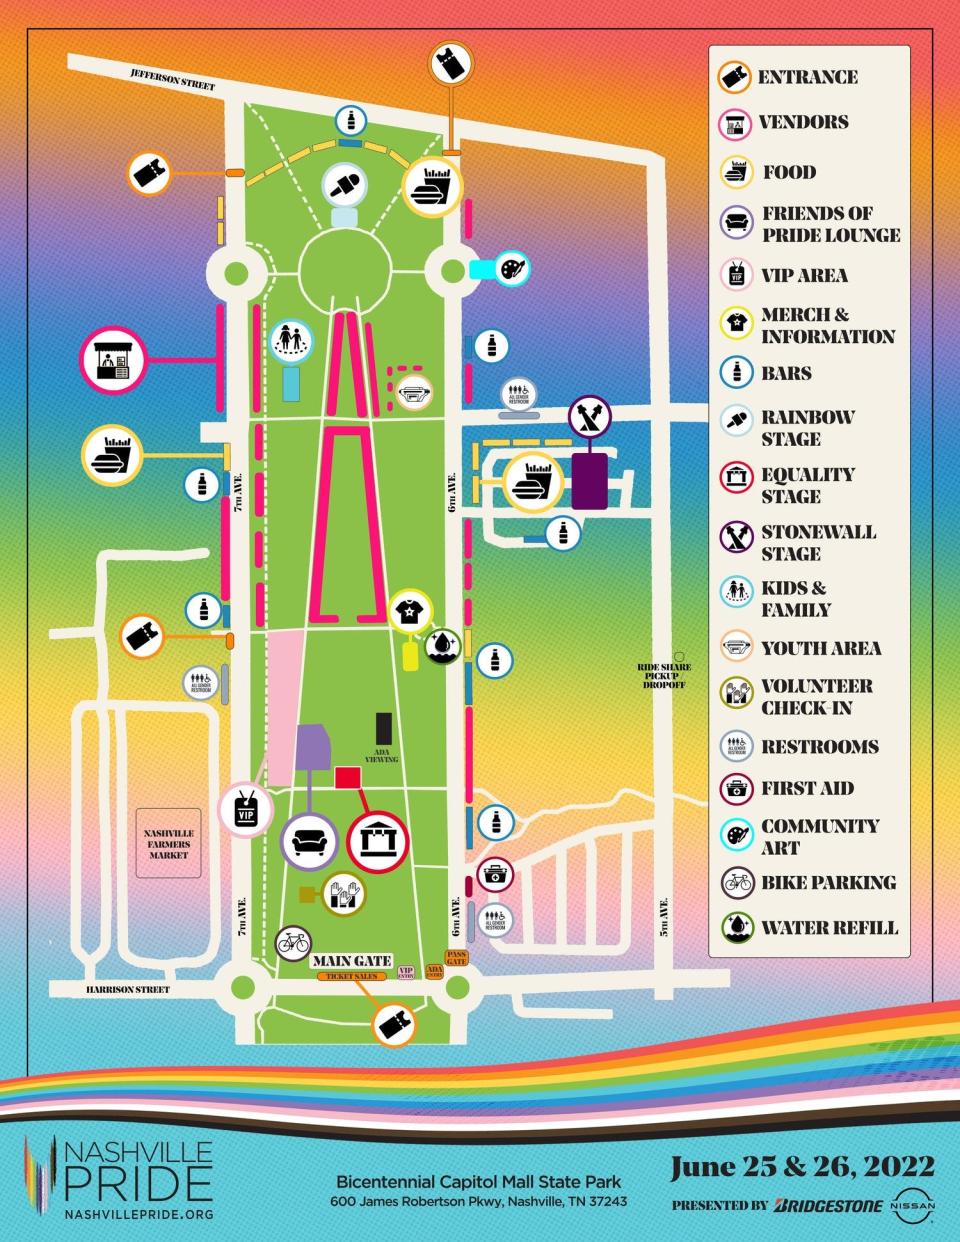 The Nashville Pride festival map shows the three stages, main gates and where to buy food and drinks.